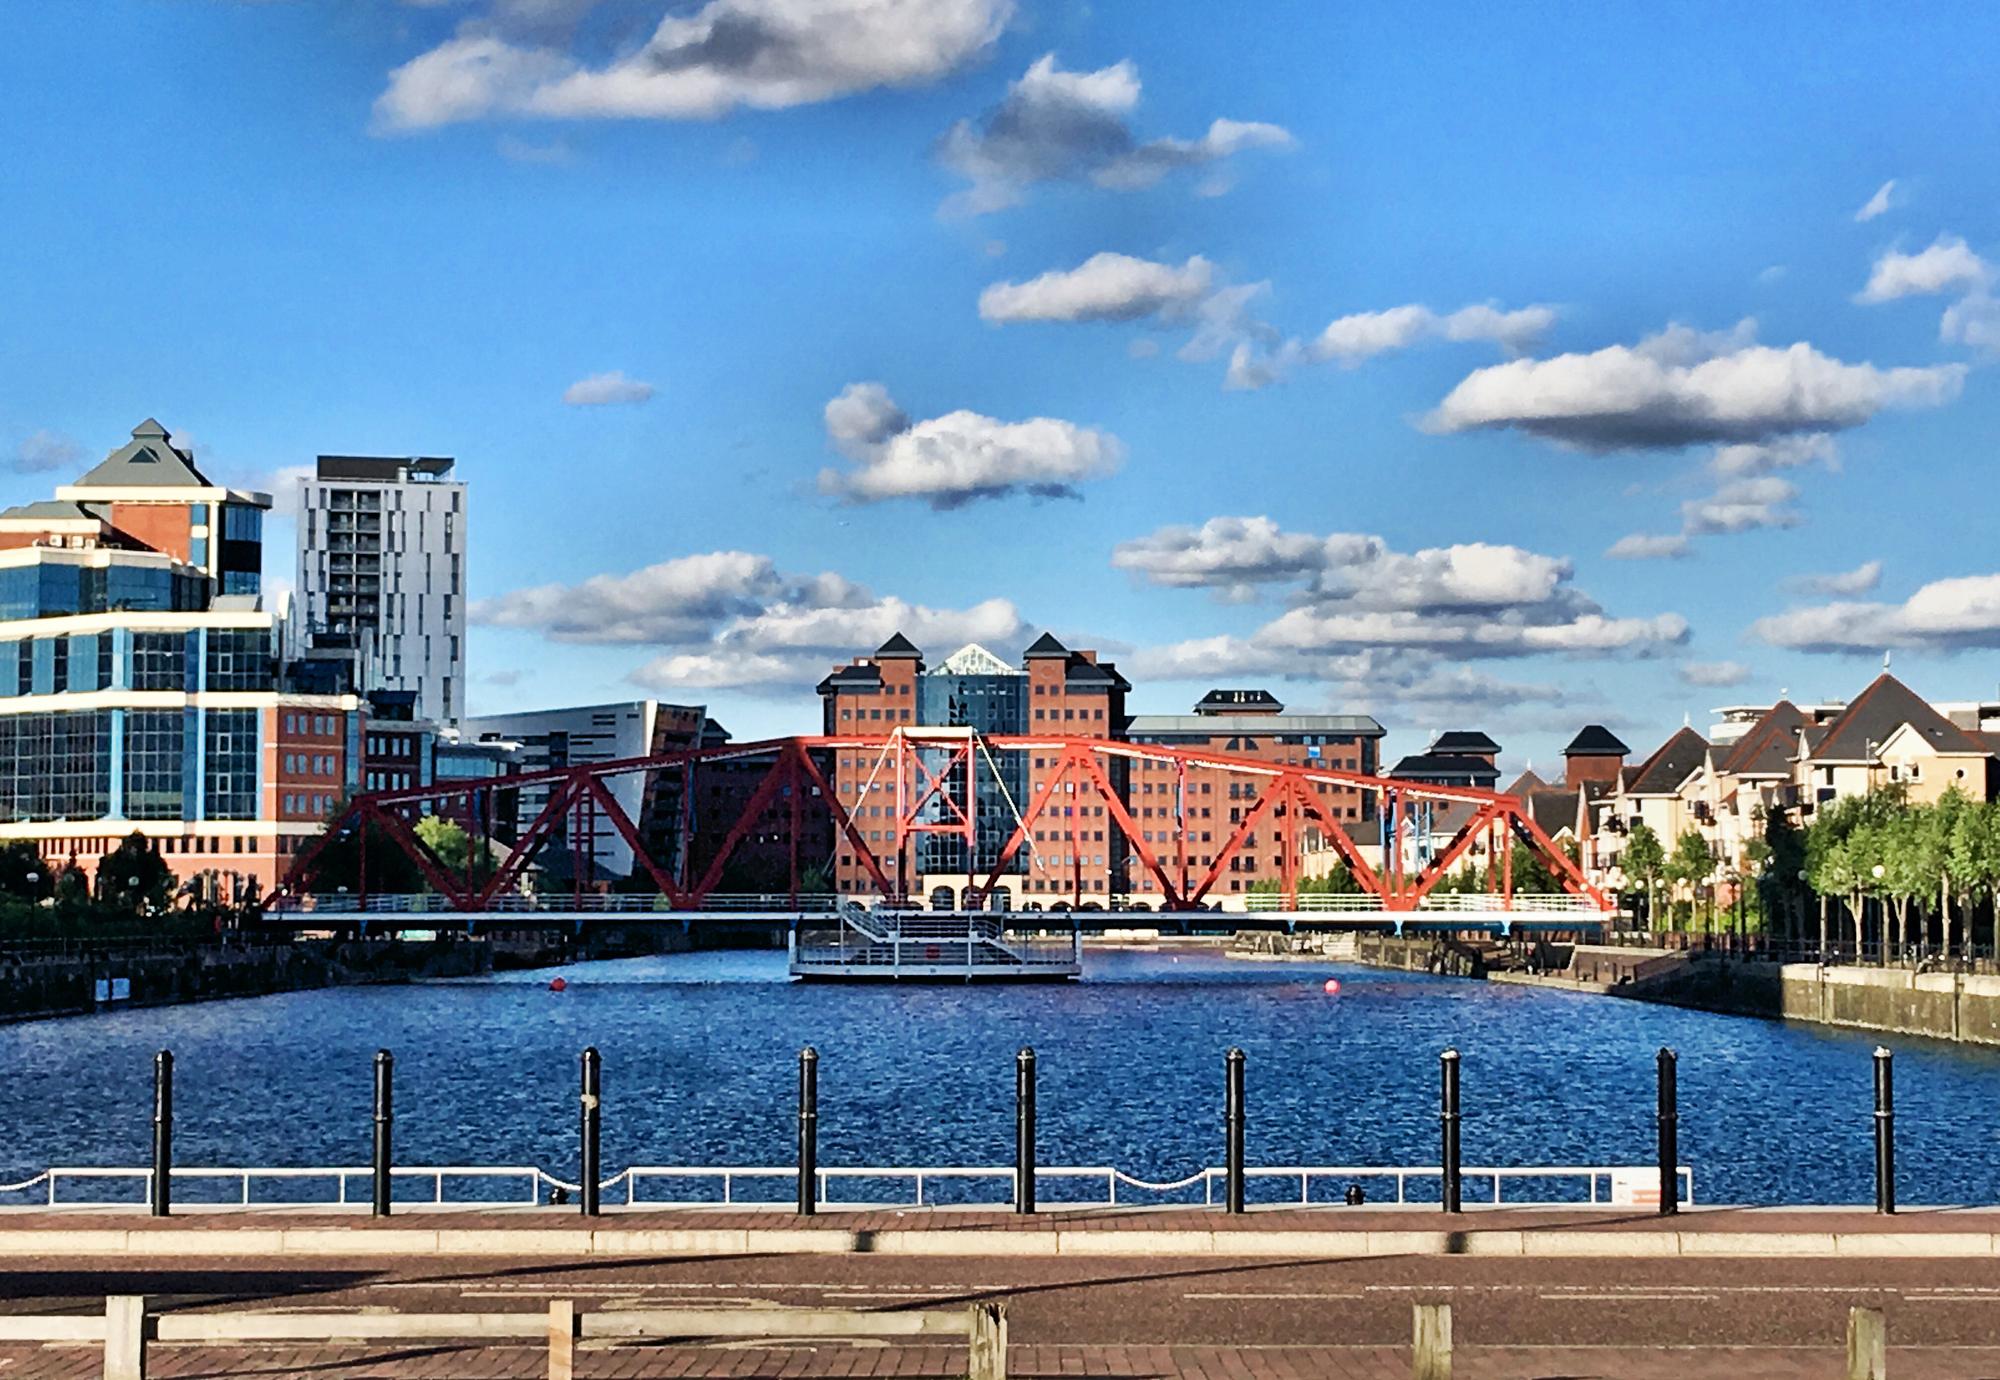 Business department to bring over 400 key central government jobs to Salford by 2025-government.vision